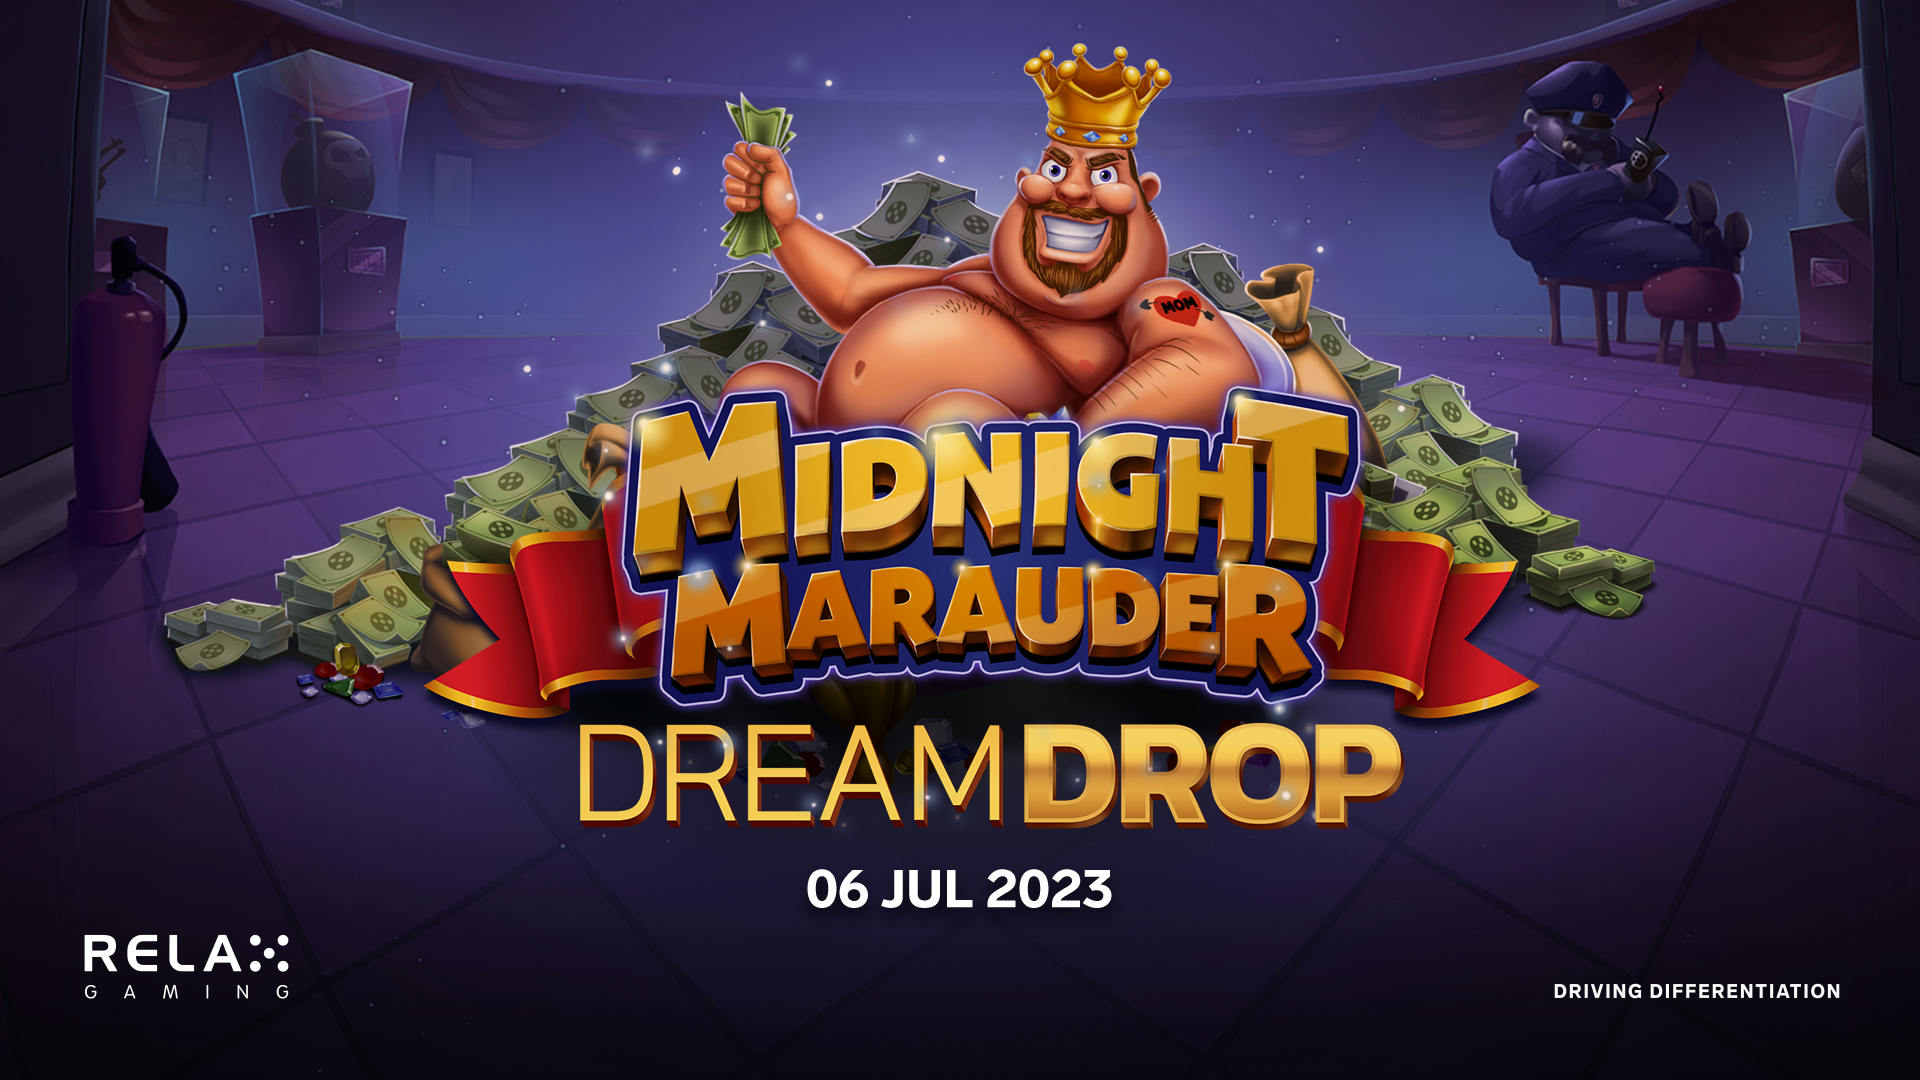 Relax Gaming gives Midnight Marauder the Dream Drop treatment